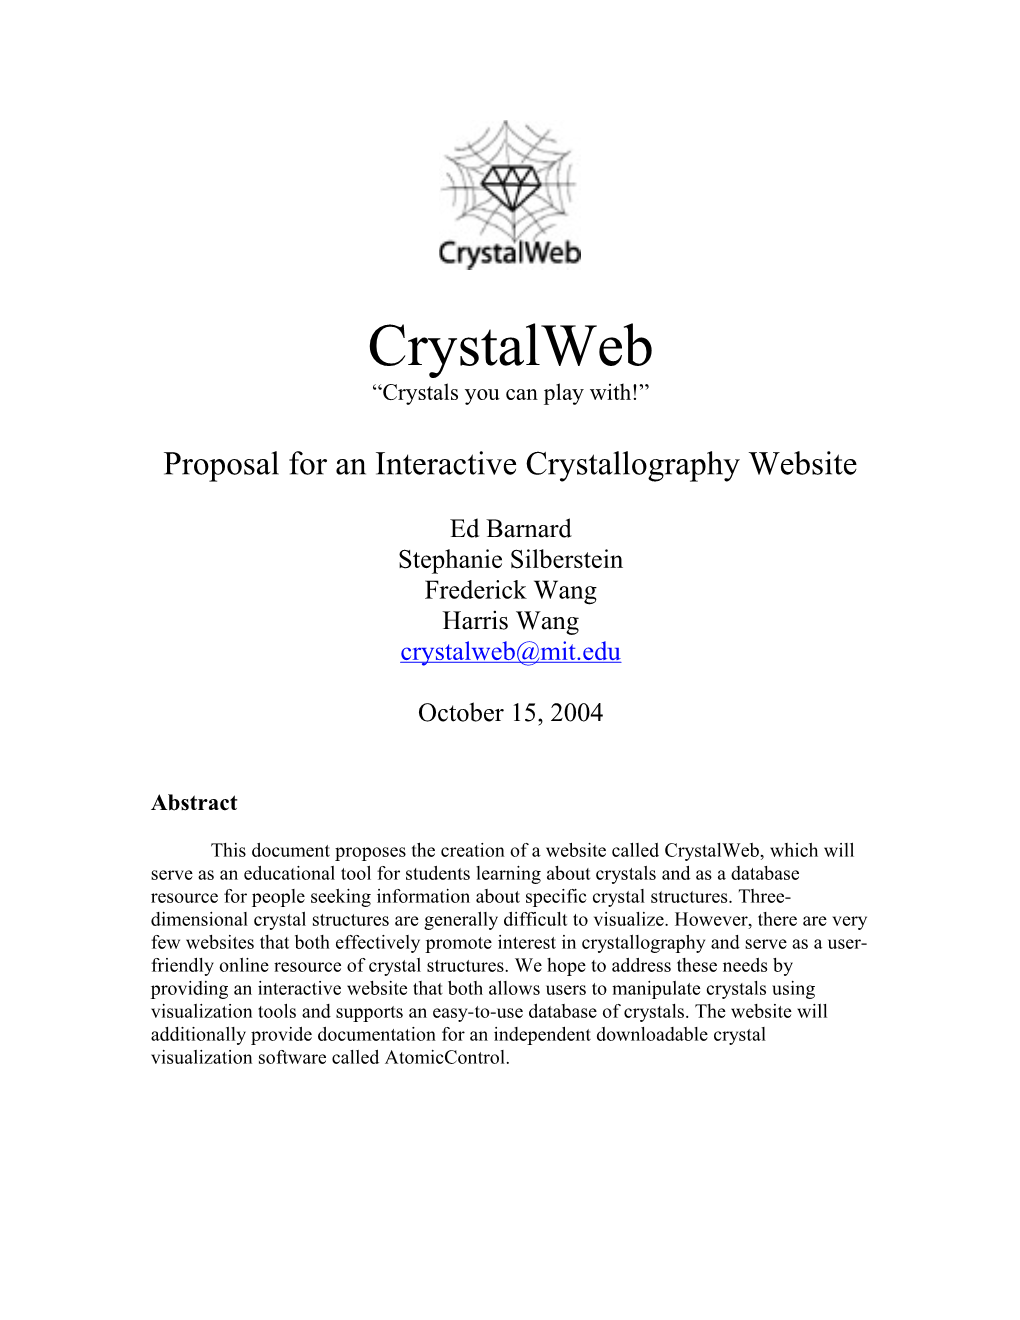 Proposal for Crystalweb: Crystal You Can Play With